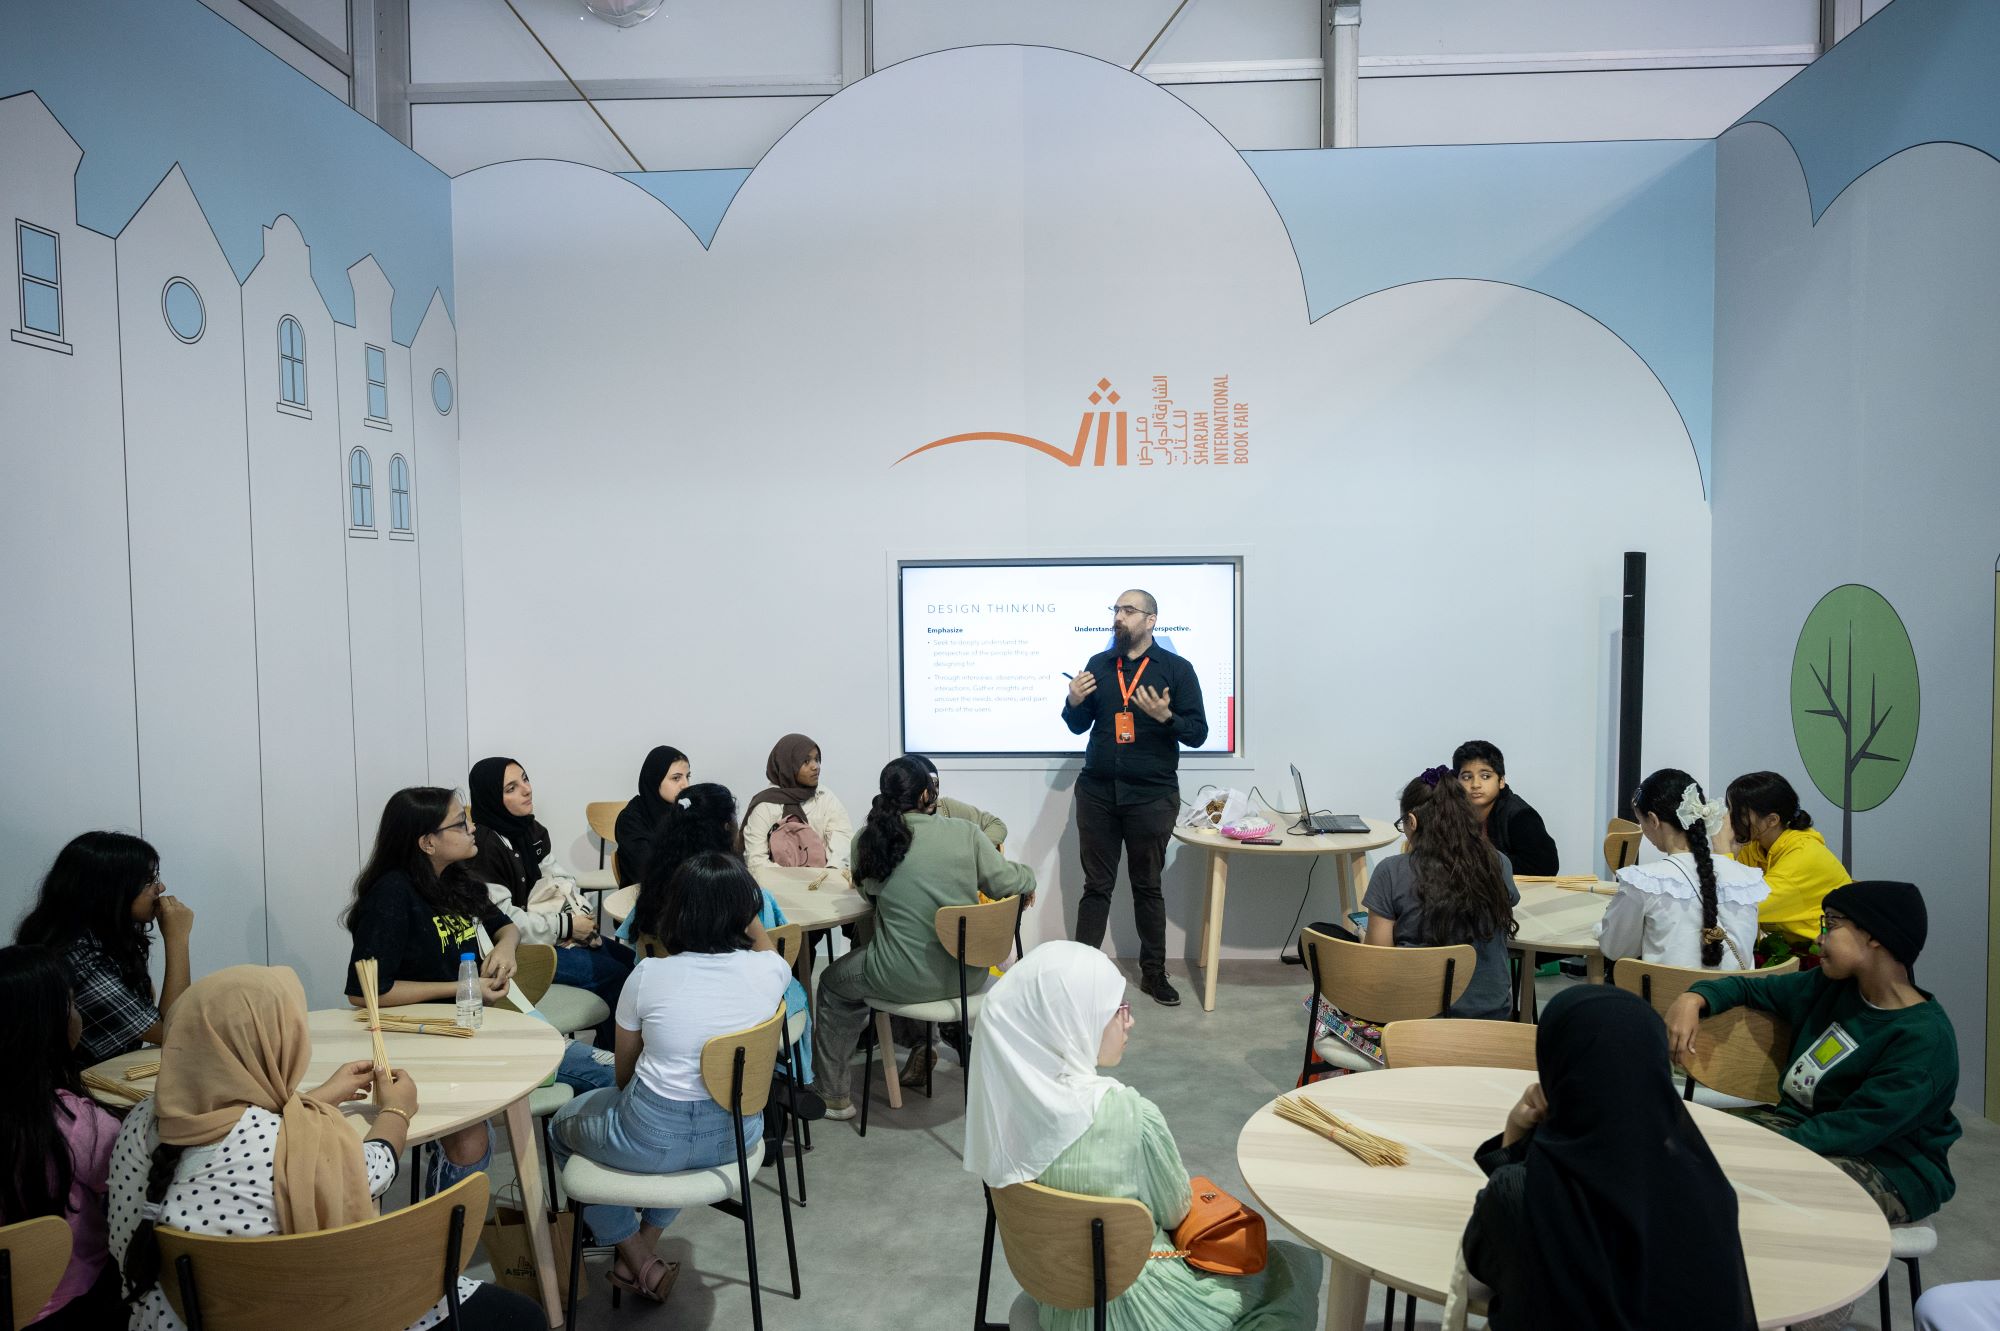 Design Thinking workshop at SIBF 2023 introduces young minds to Stanford University’s creative problem-solving approach